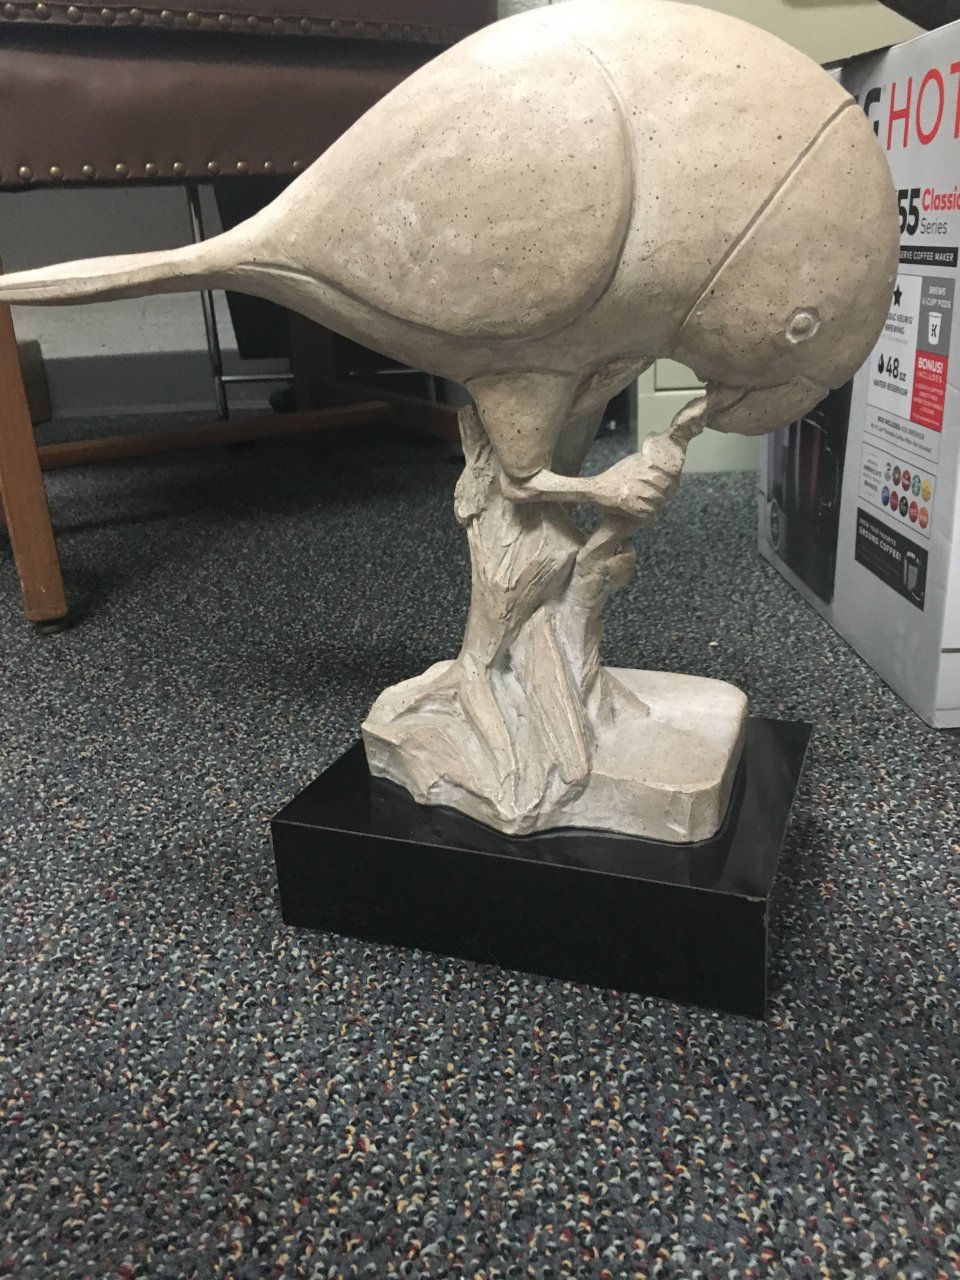 I'm Trying To Find Information Regarding An Austin Production Sculpture